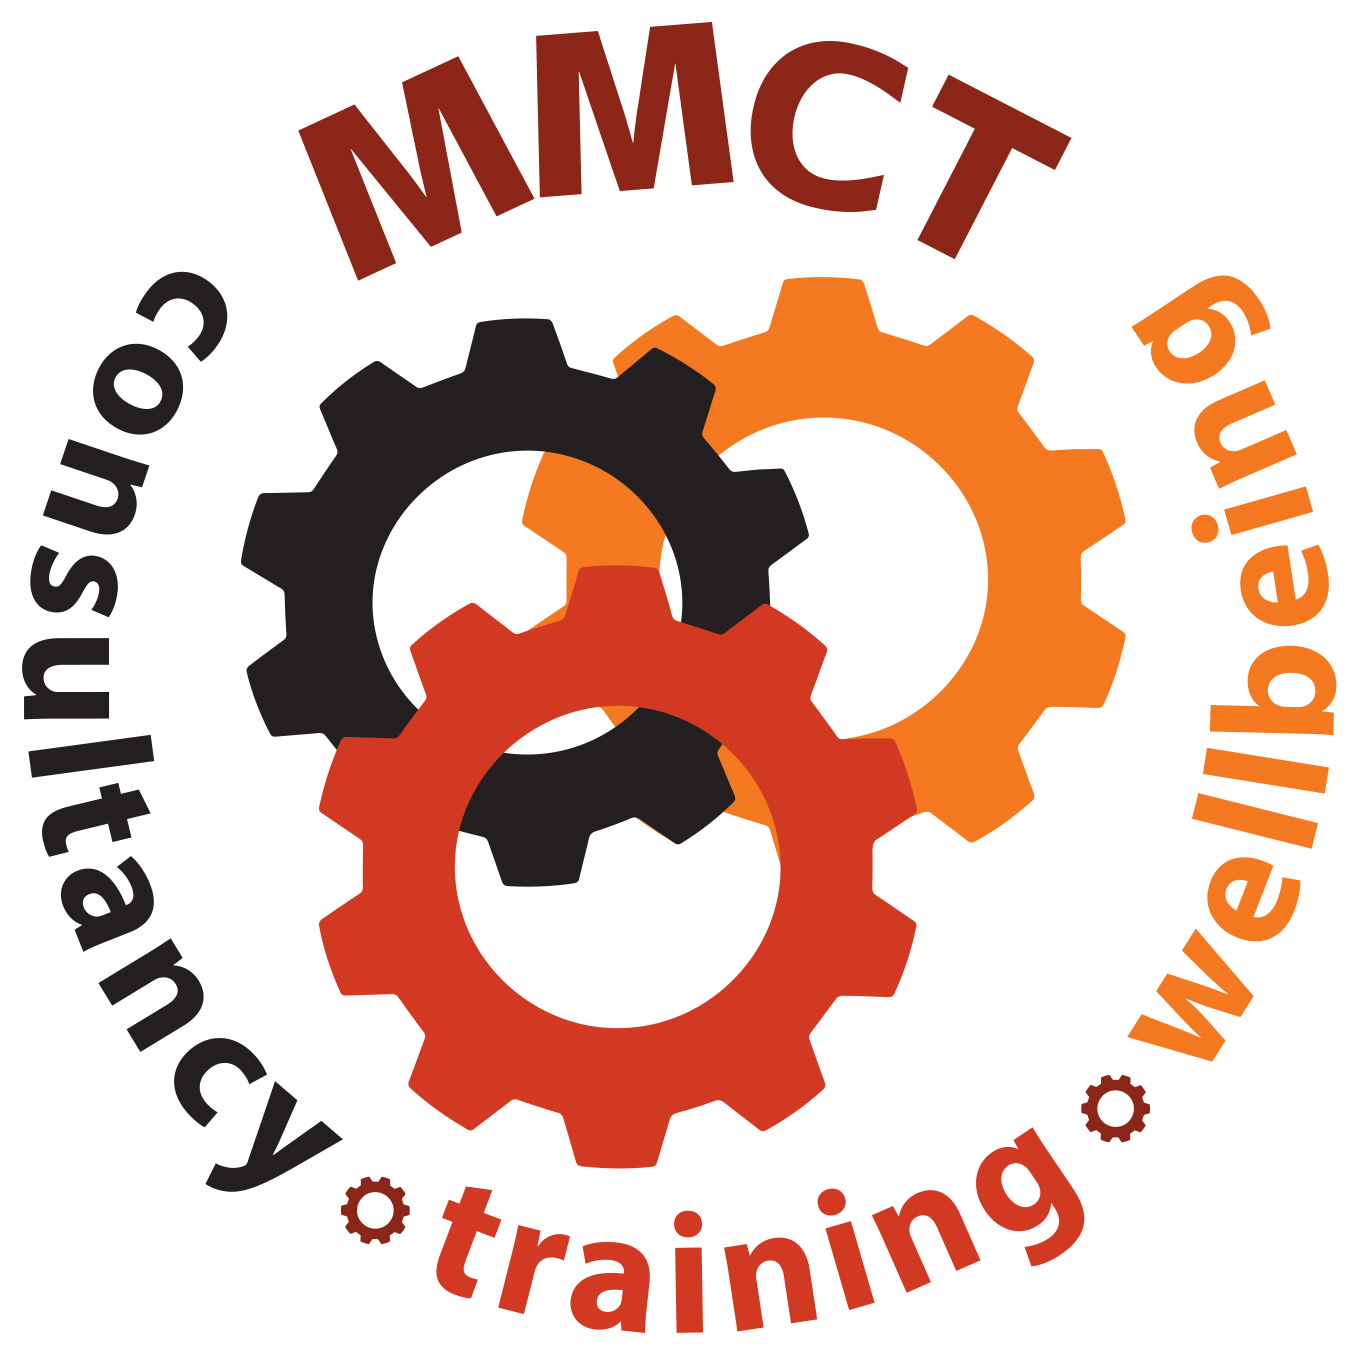 Mike Manning Consultancy & Training Ltd